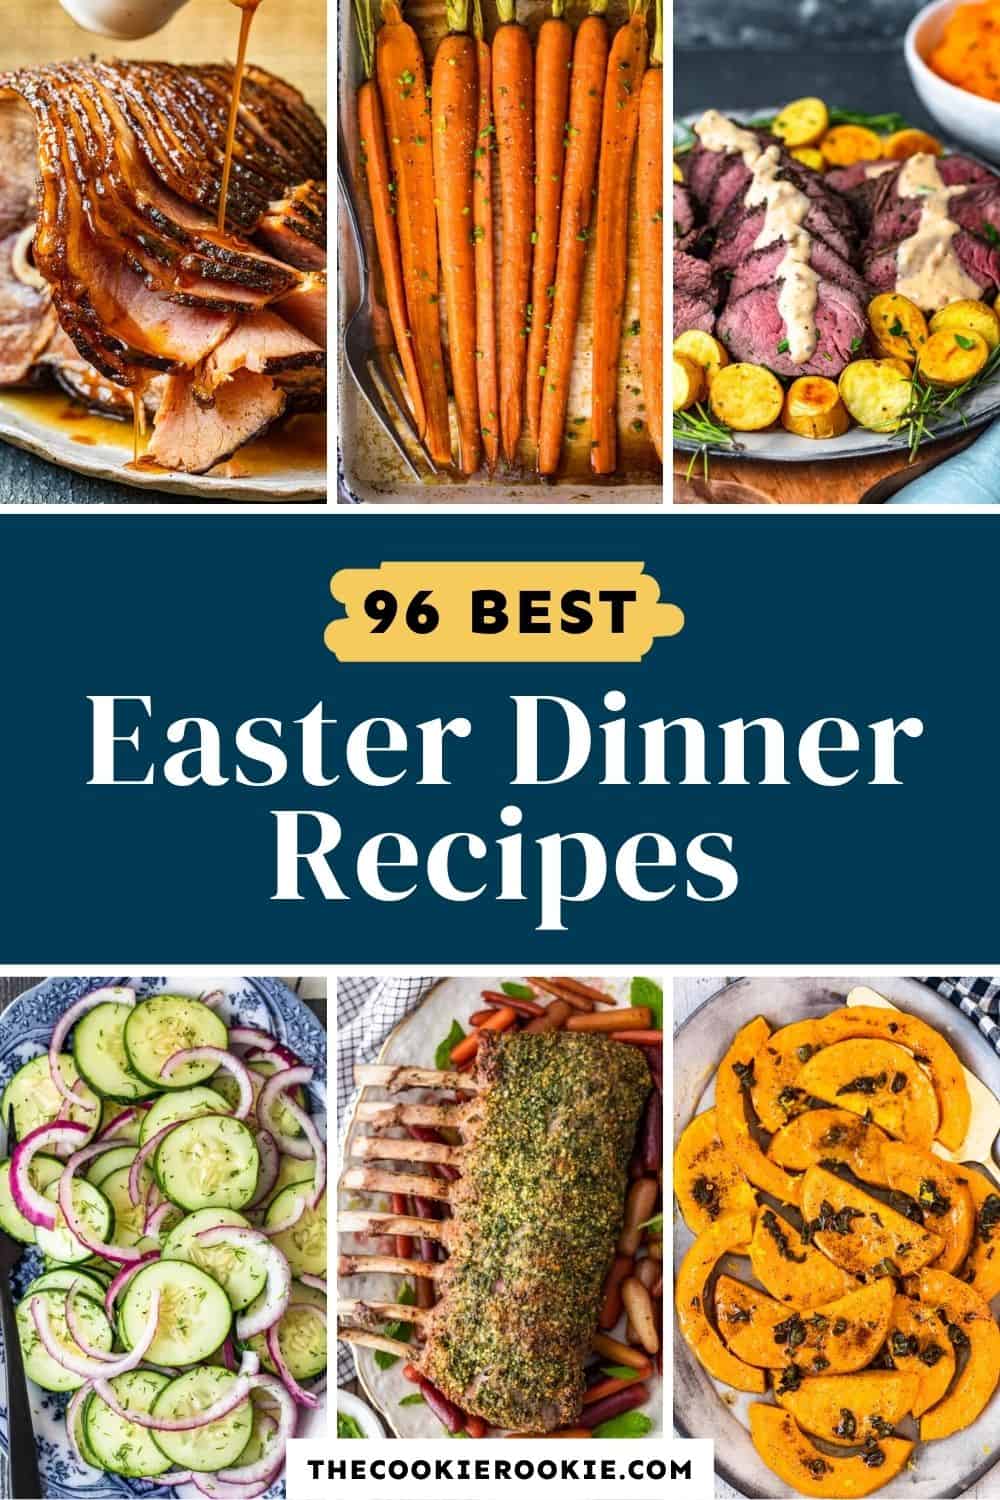 96+ Easter Dinner Ideas for Your Sunday Menu - The Cookie Rookie®